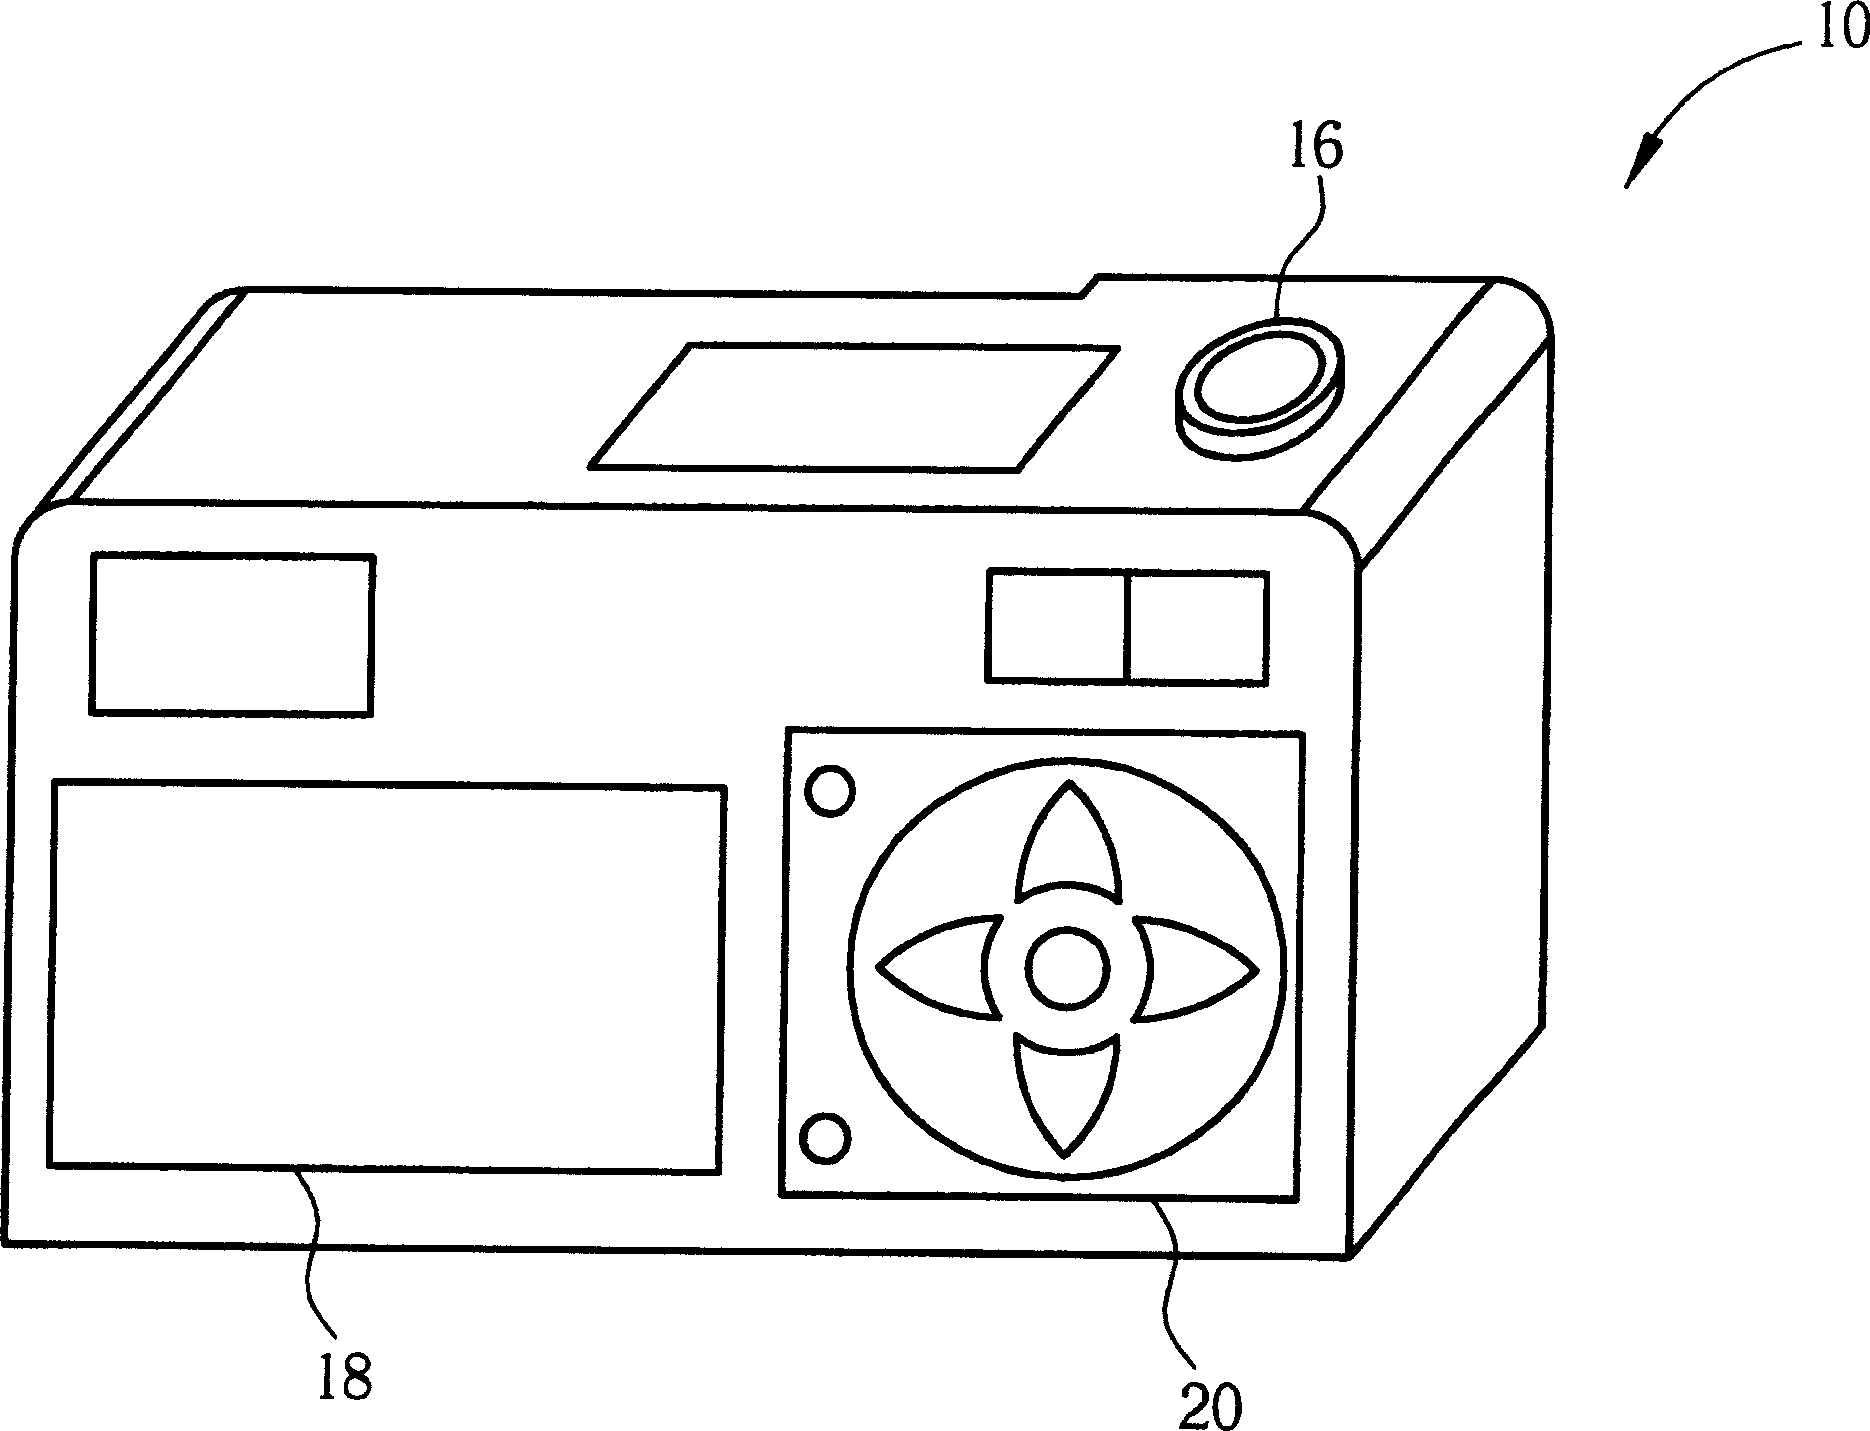 Digital image camera capable of shooting different angle of images